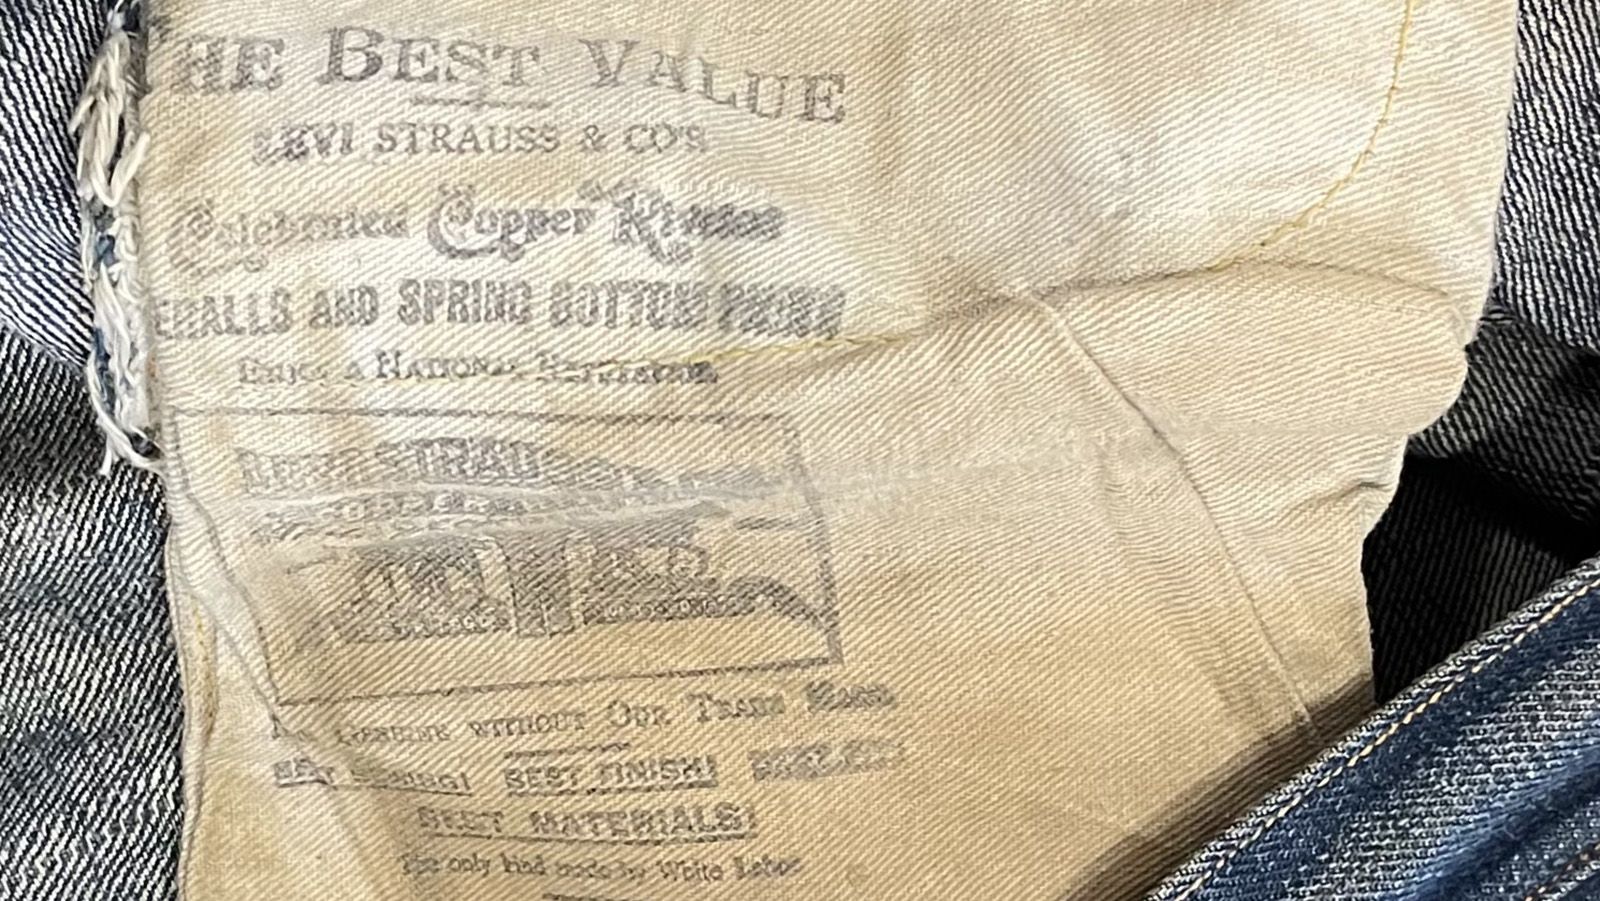 A pair of Levi's jeans from 1880s, found in abandoned mine, sells for Rs 72  lakh - The Economic Times